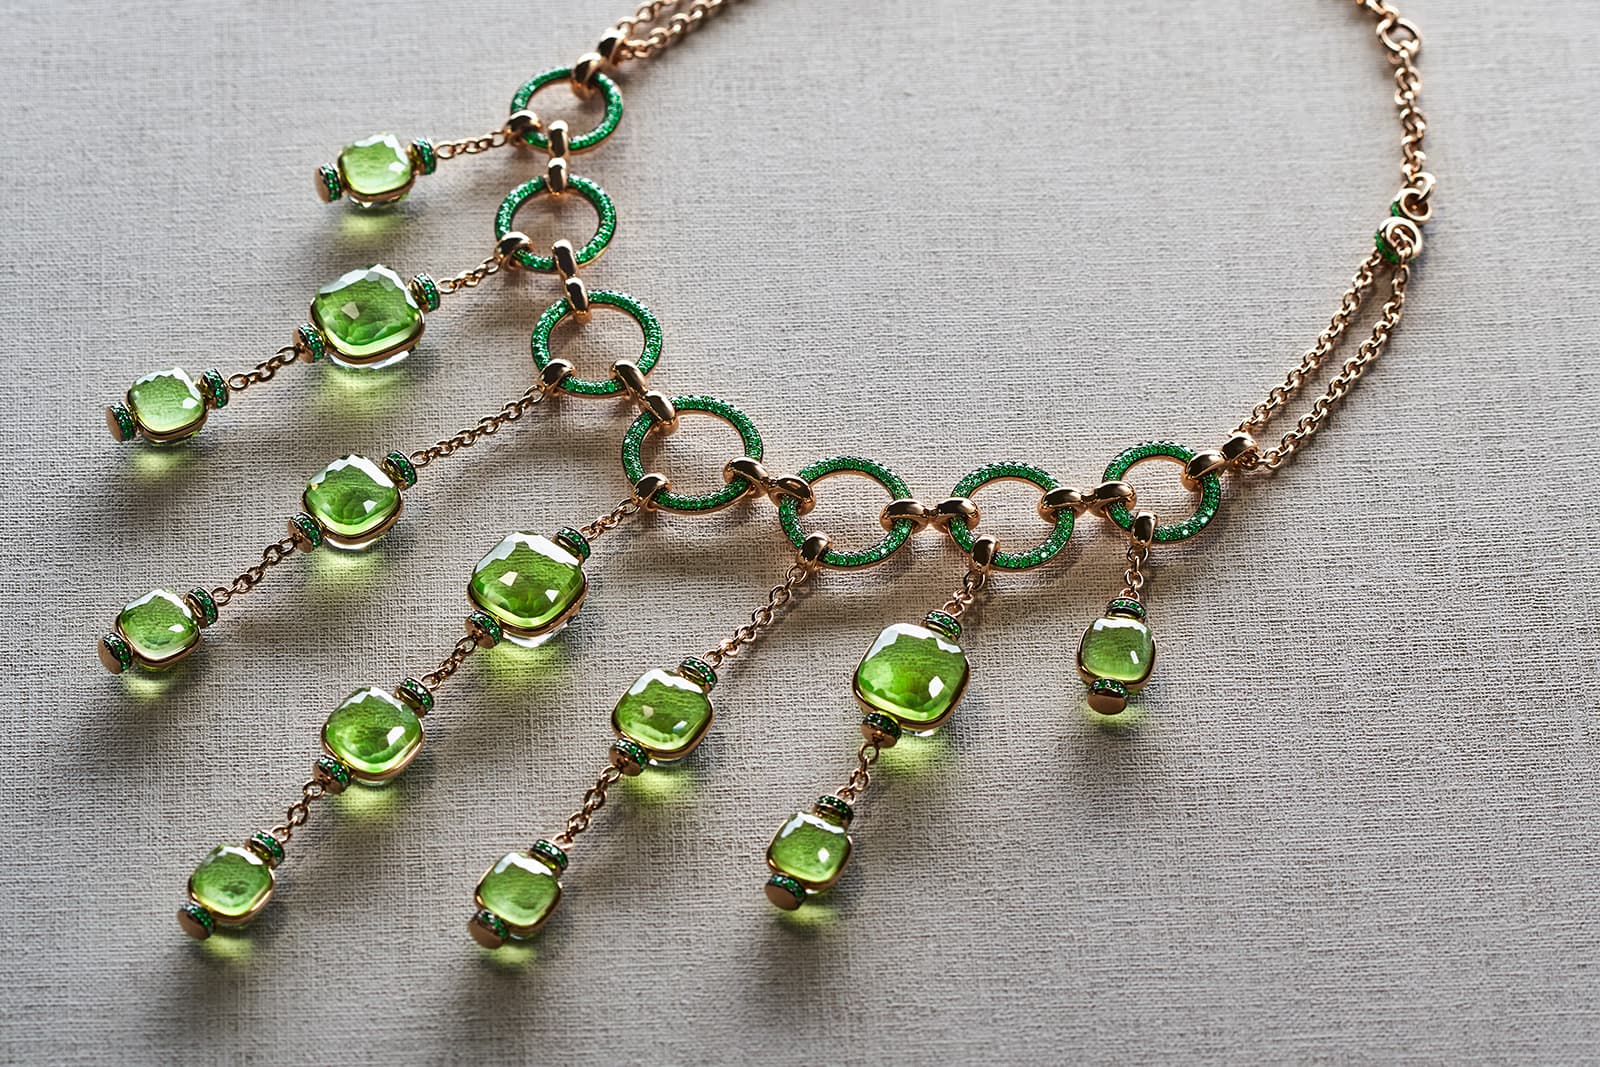 Pomellato's Nudo Cascade peridot high jewellery necklace with tsavorite accents, inspired by the iconic Nudo collection